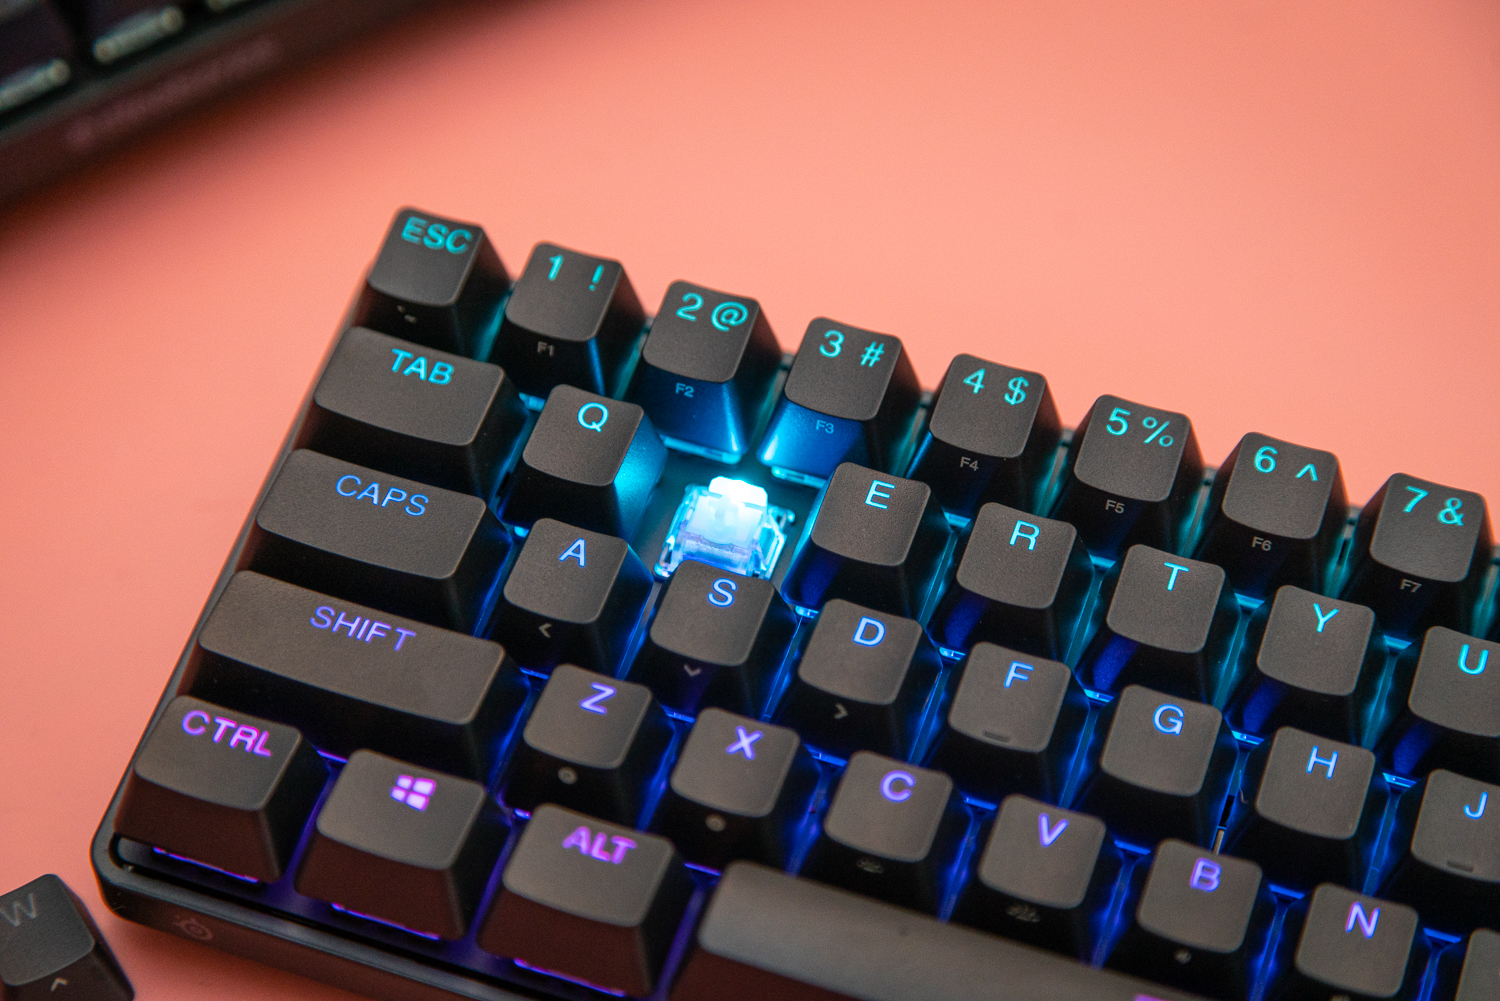 SteelSeries Apex Pro Mini review: An enthusiast's keyboard